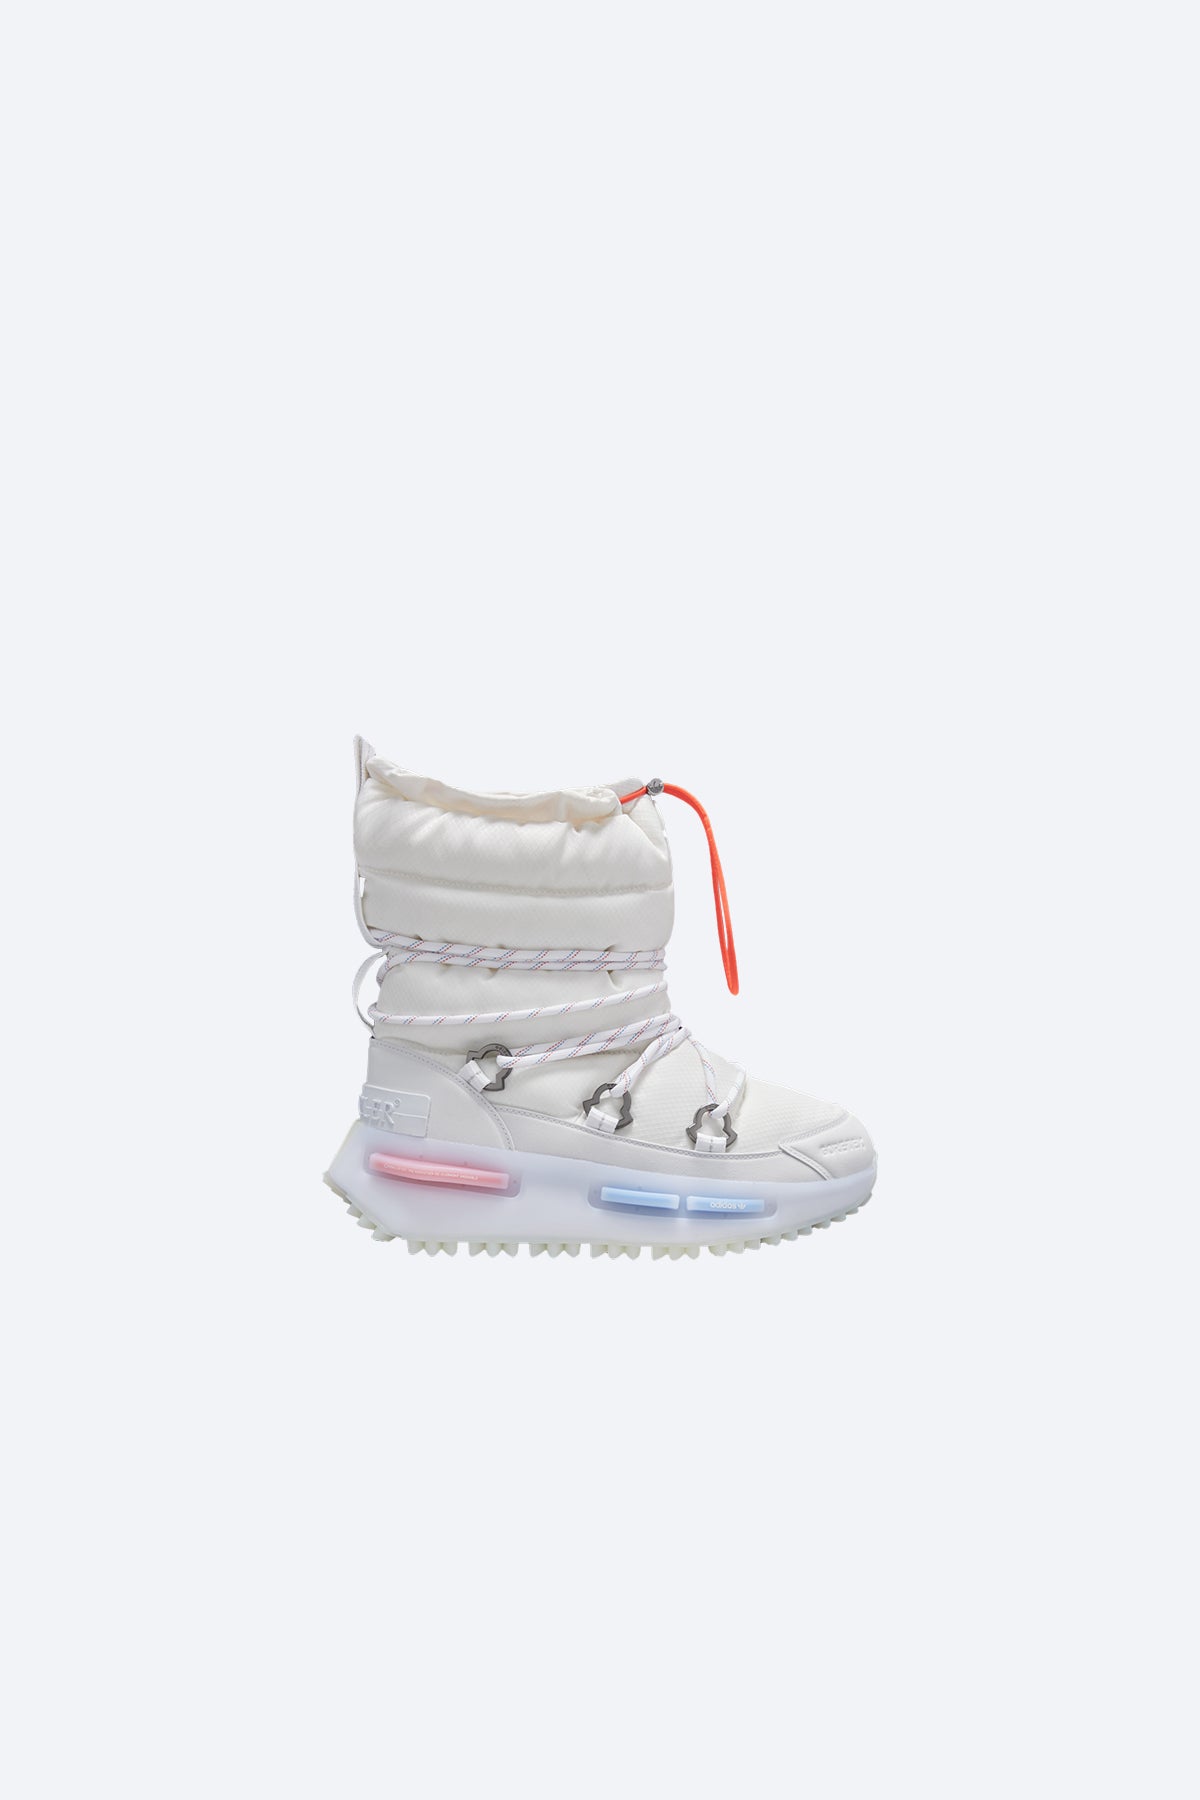 MONCLER X ADIDAS ORIGINALS | NMD MID ANKLE BOOTS